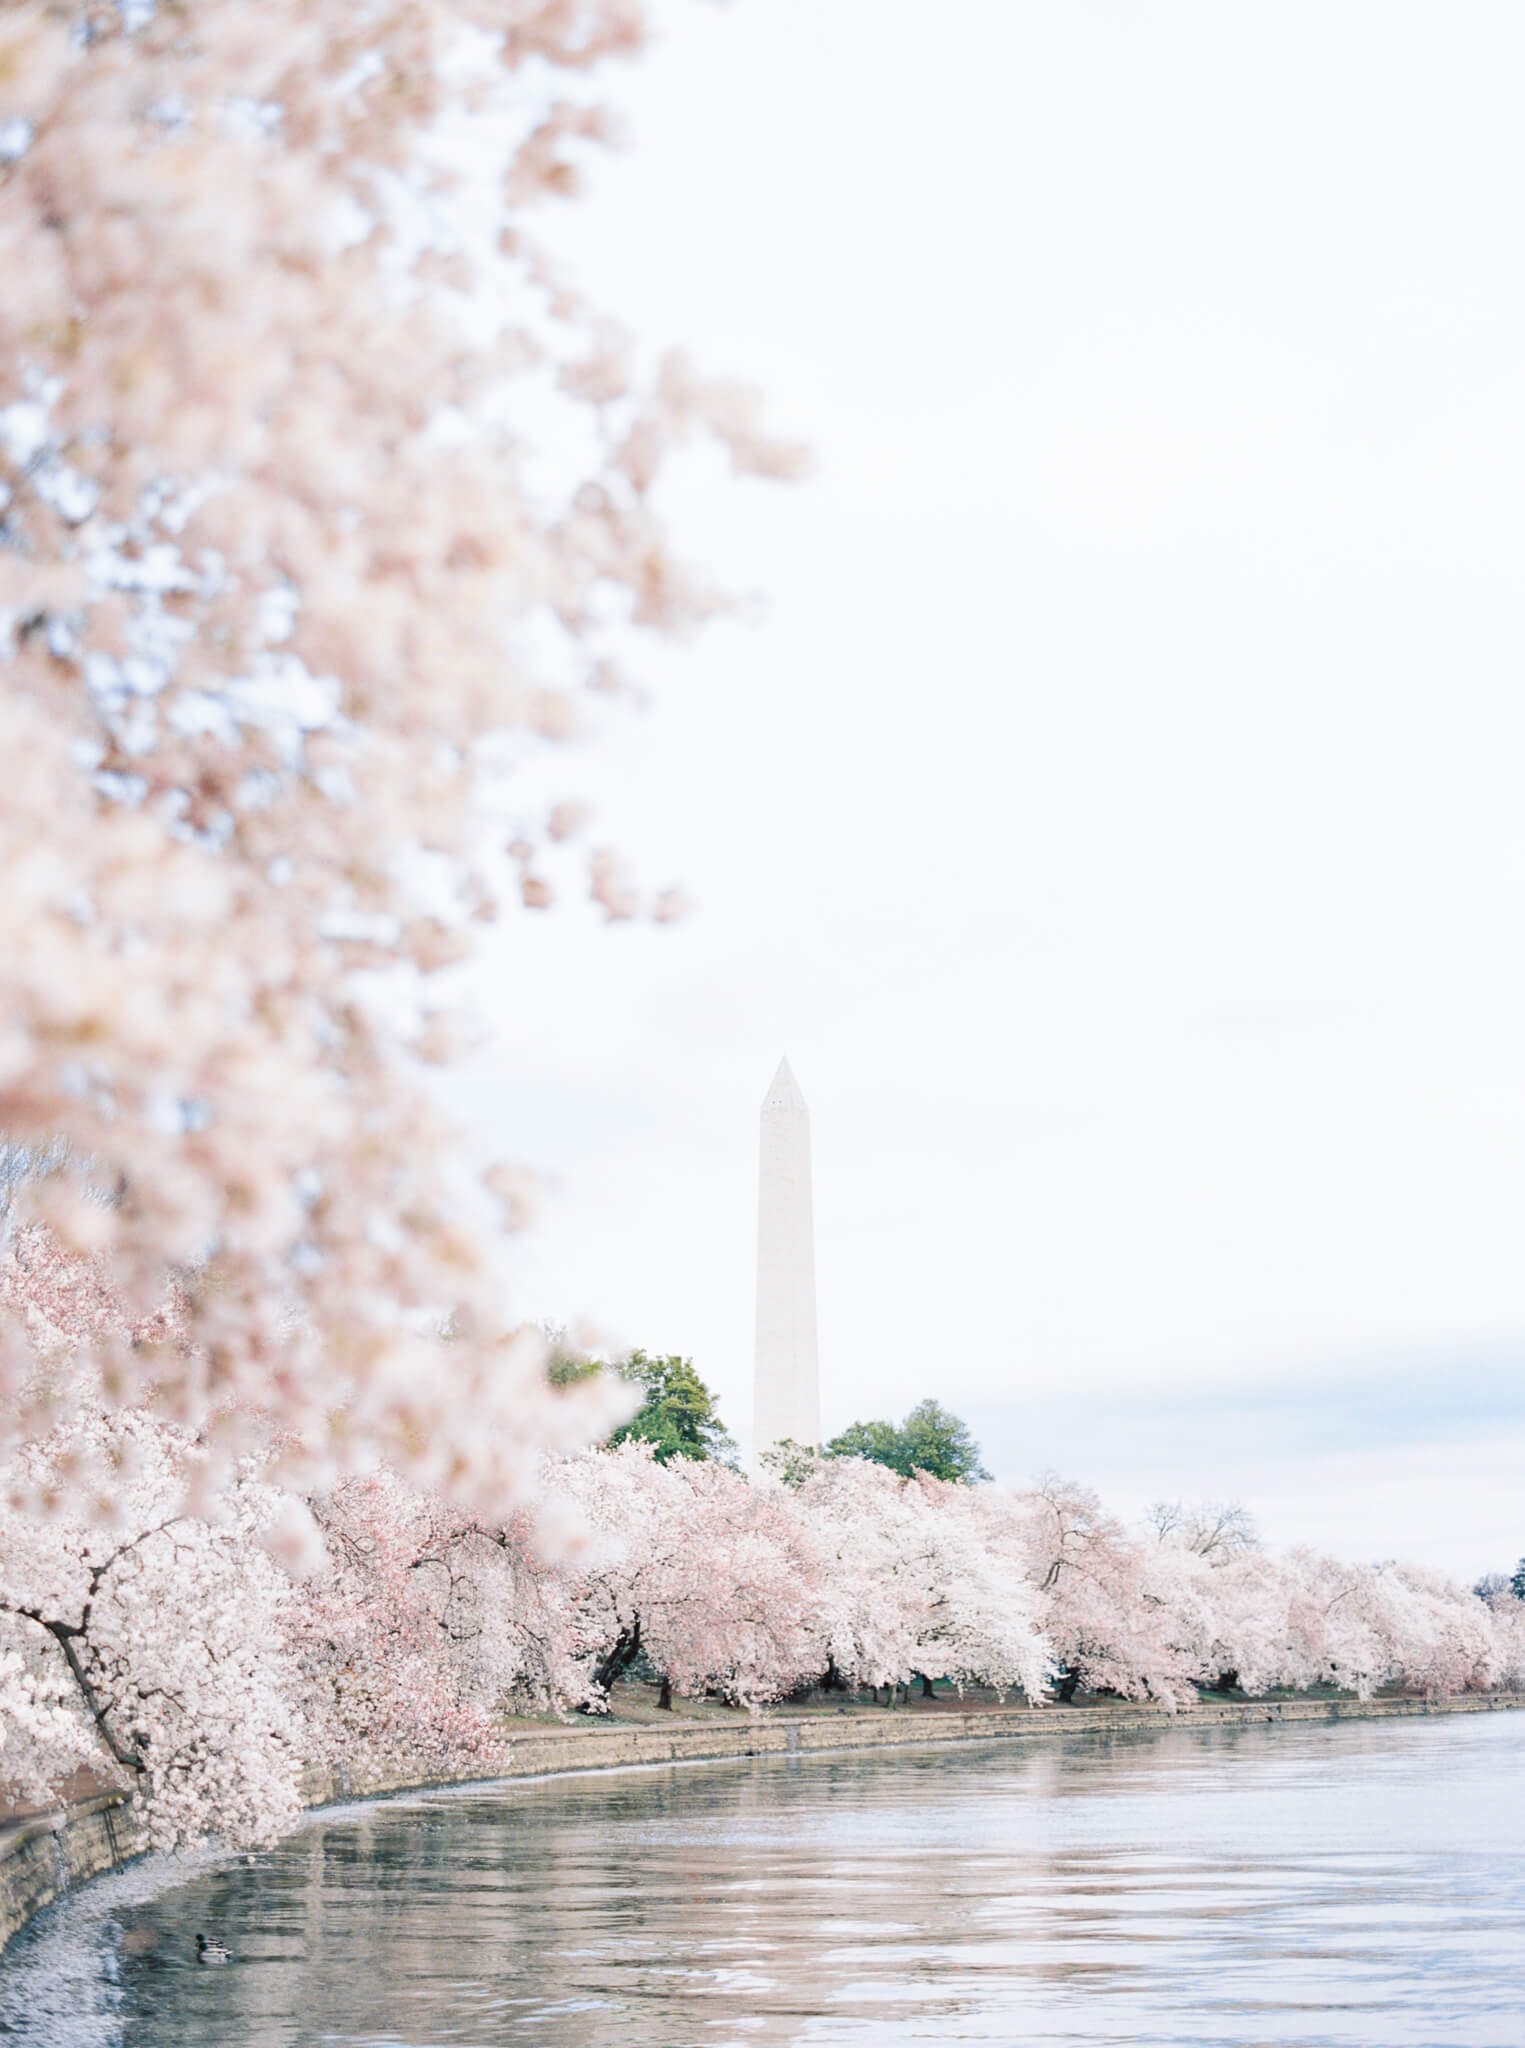 The Washington Monument and D.C. Tidal Basin lined with blooming cherry blossom trees